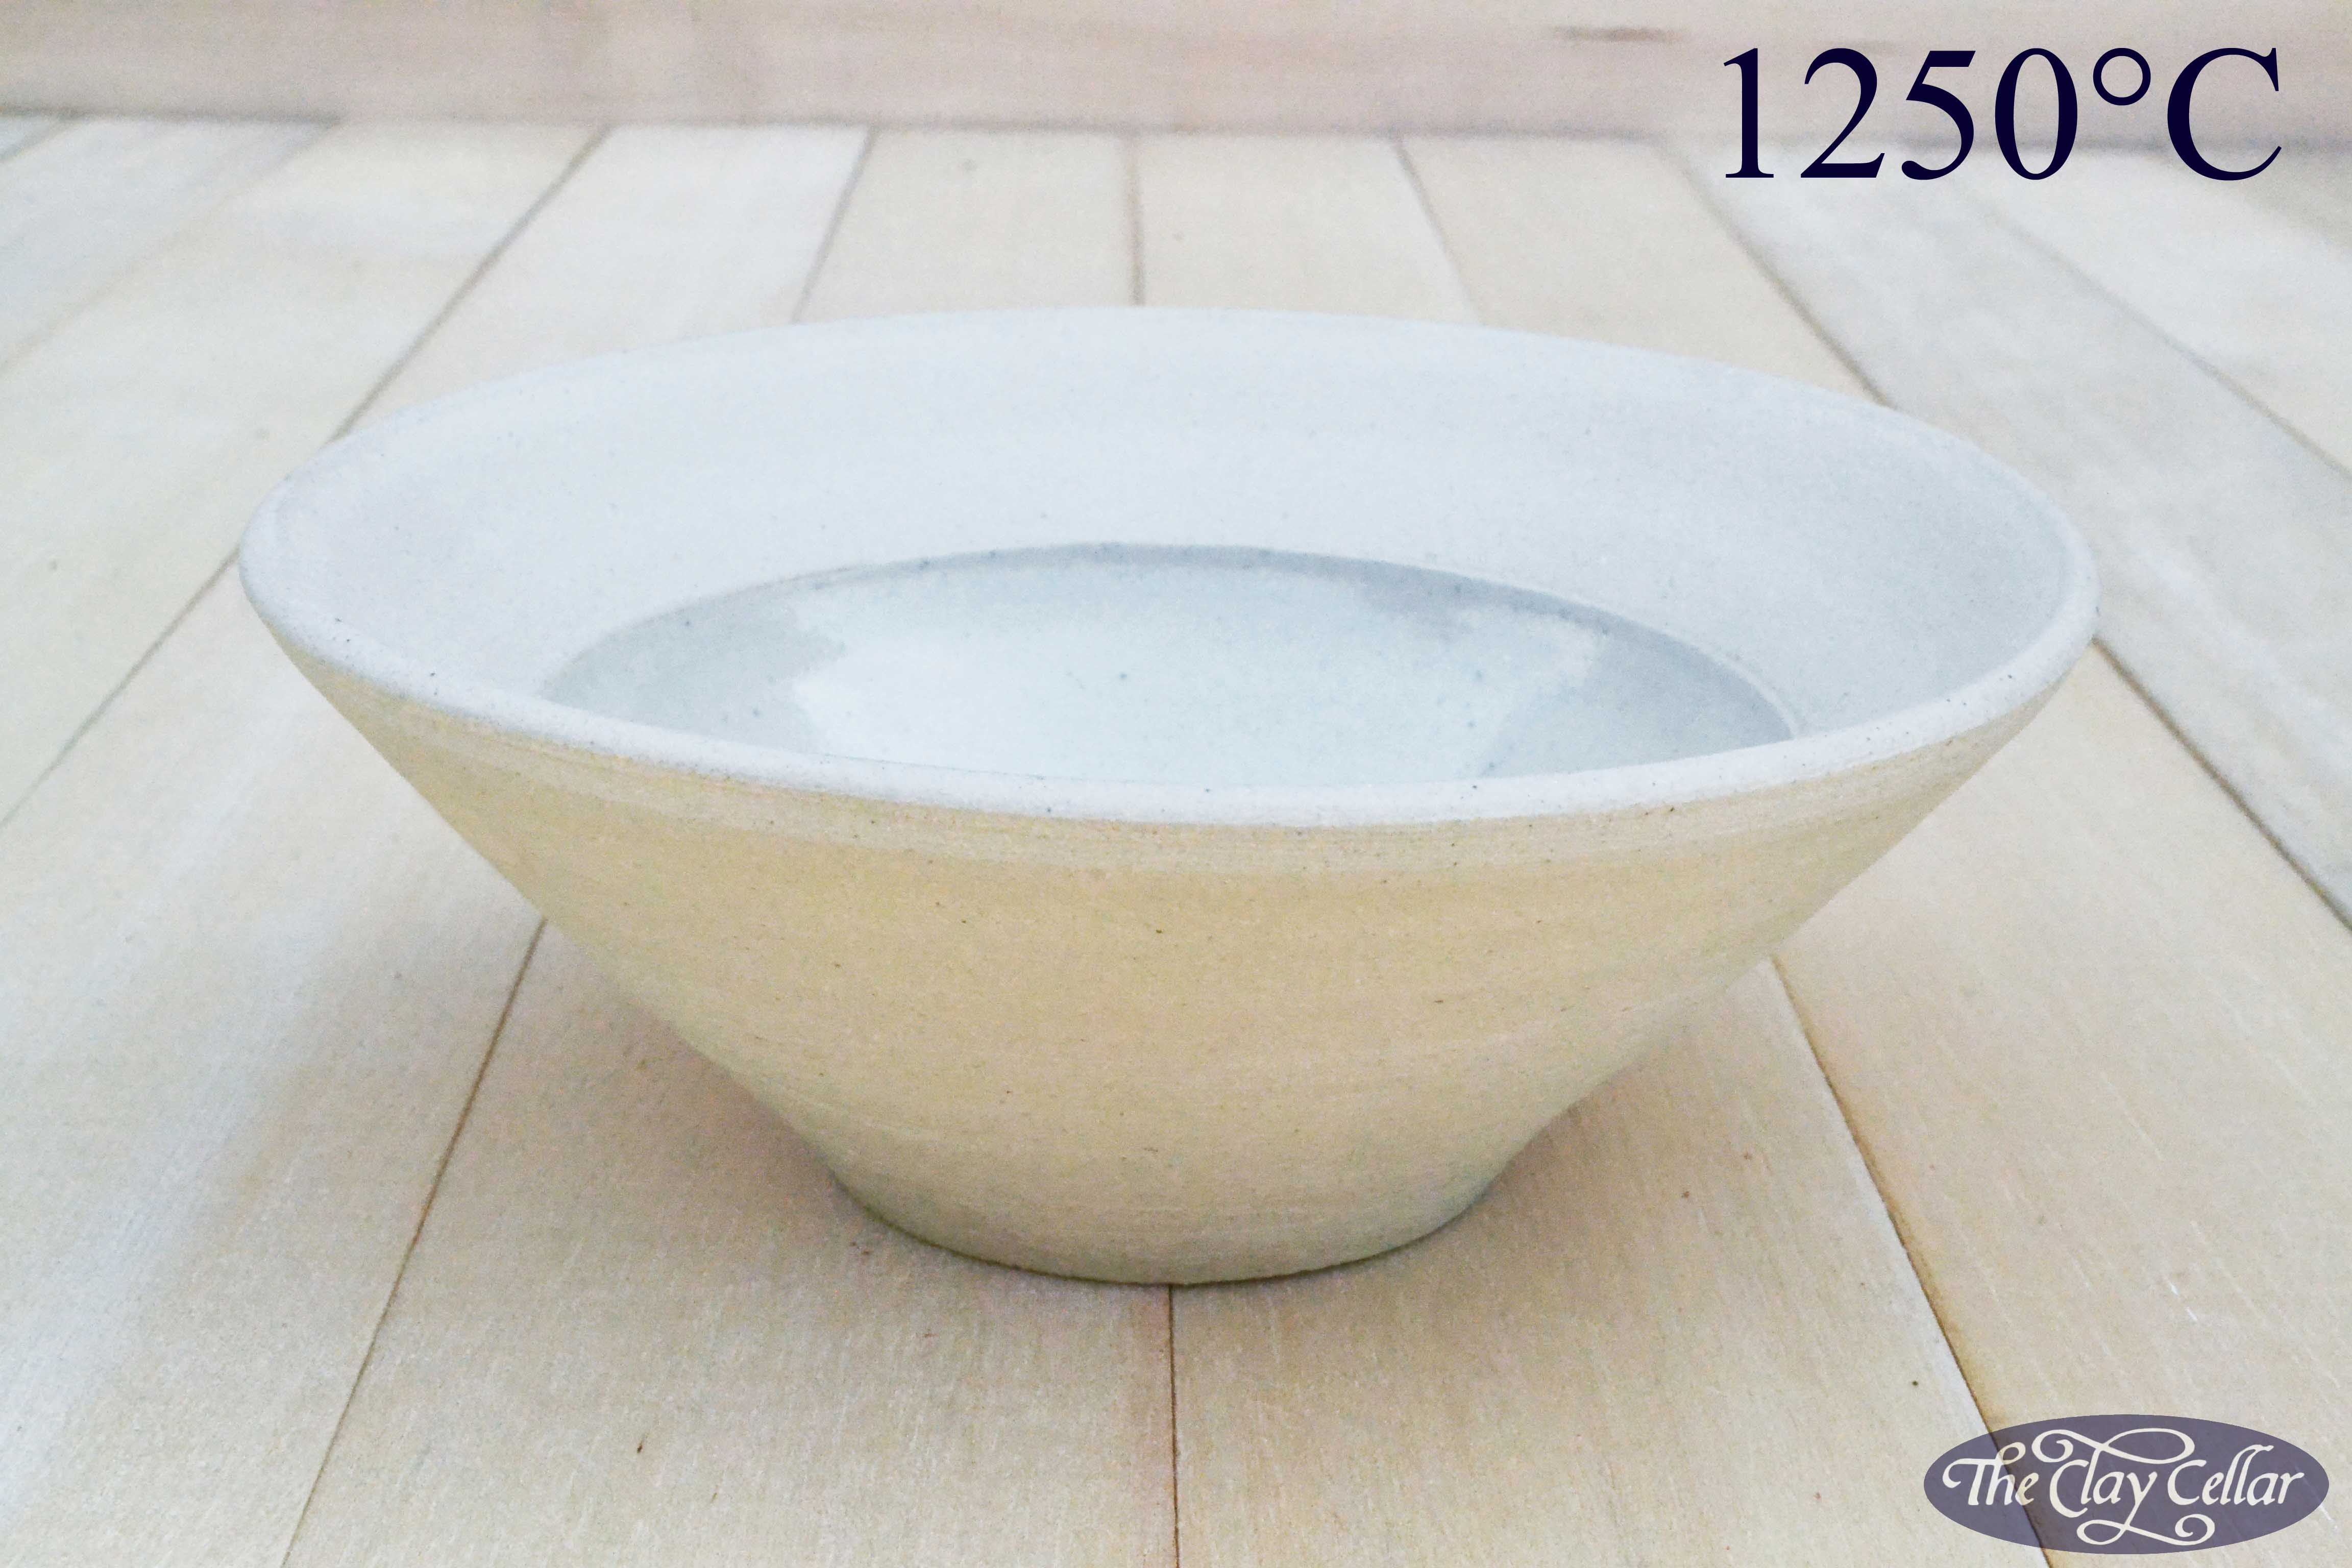 2 kgs Smooth White Earthenware pottery clay 